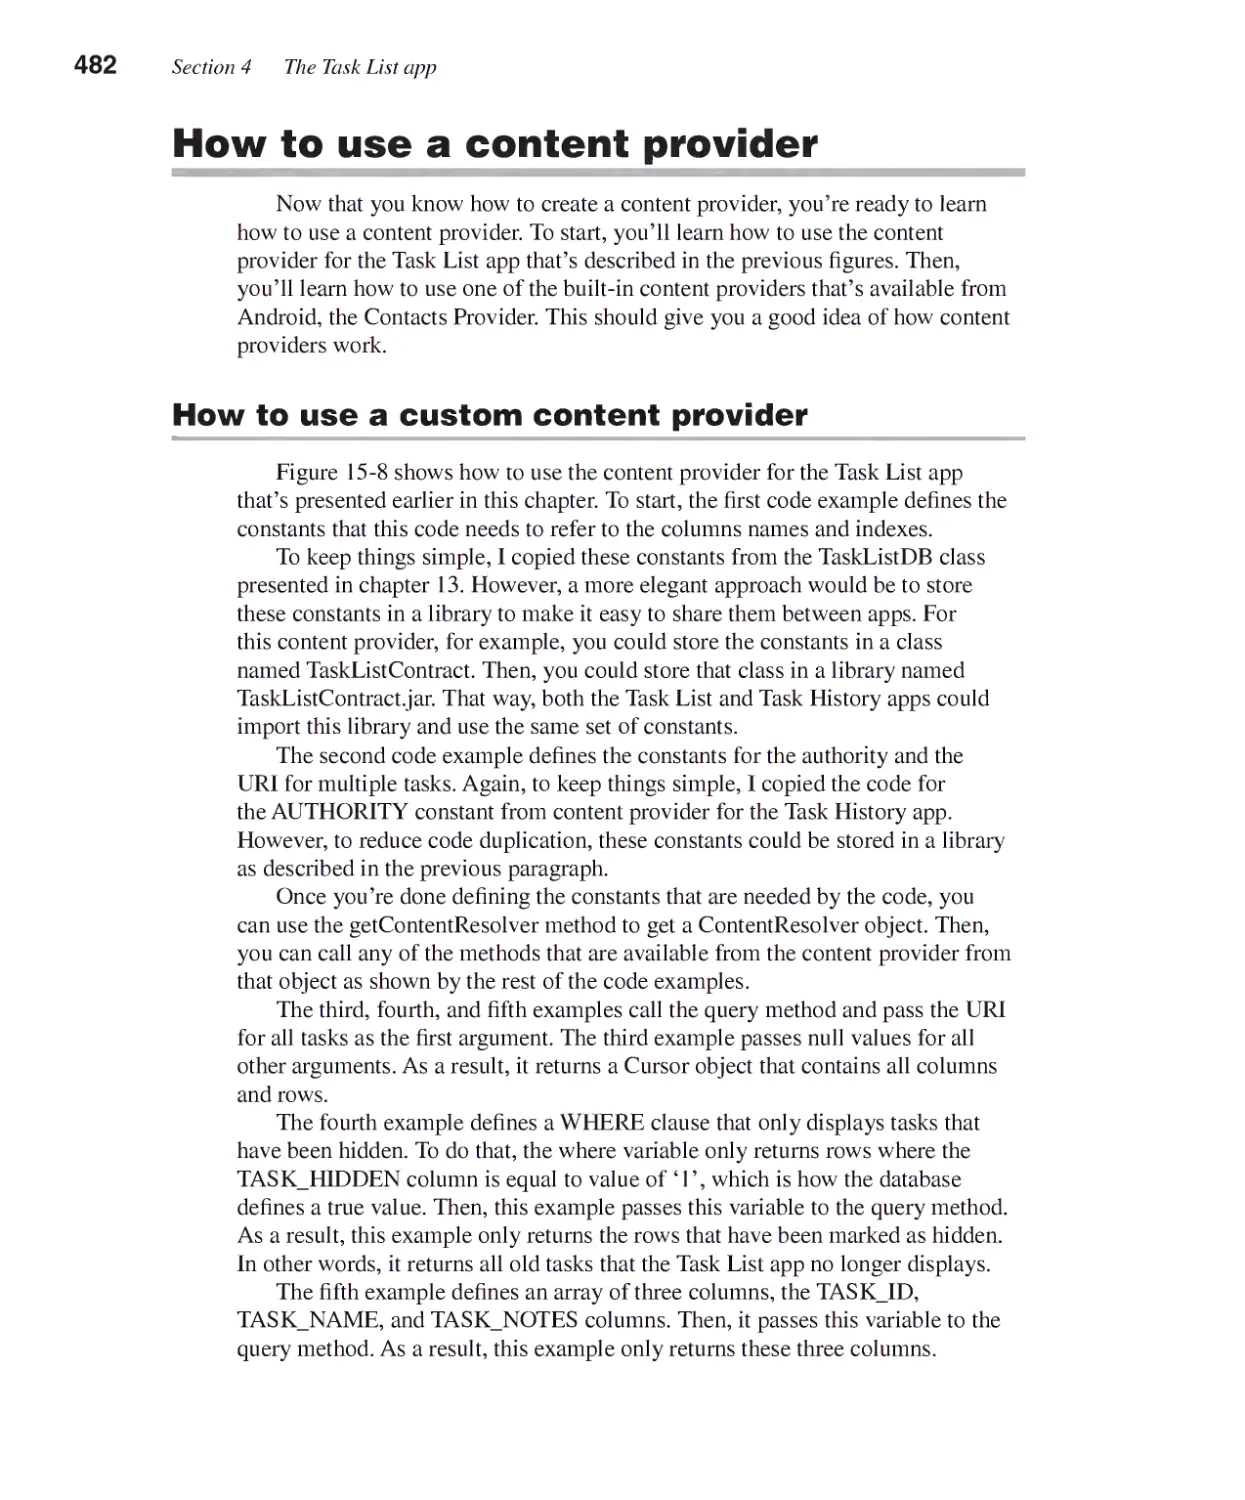 How to Use a Content Provider